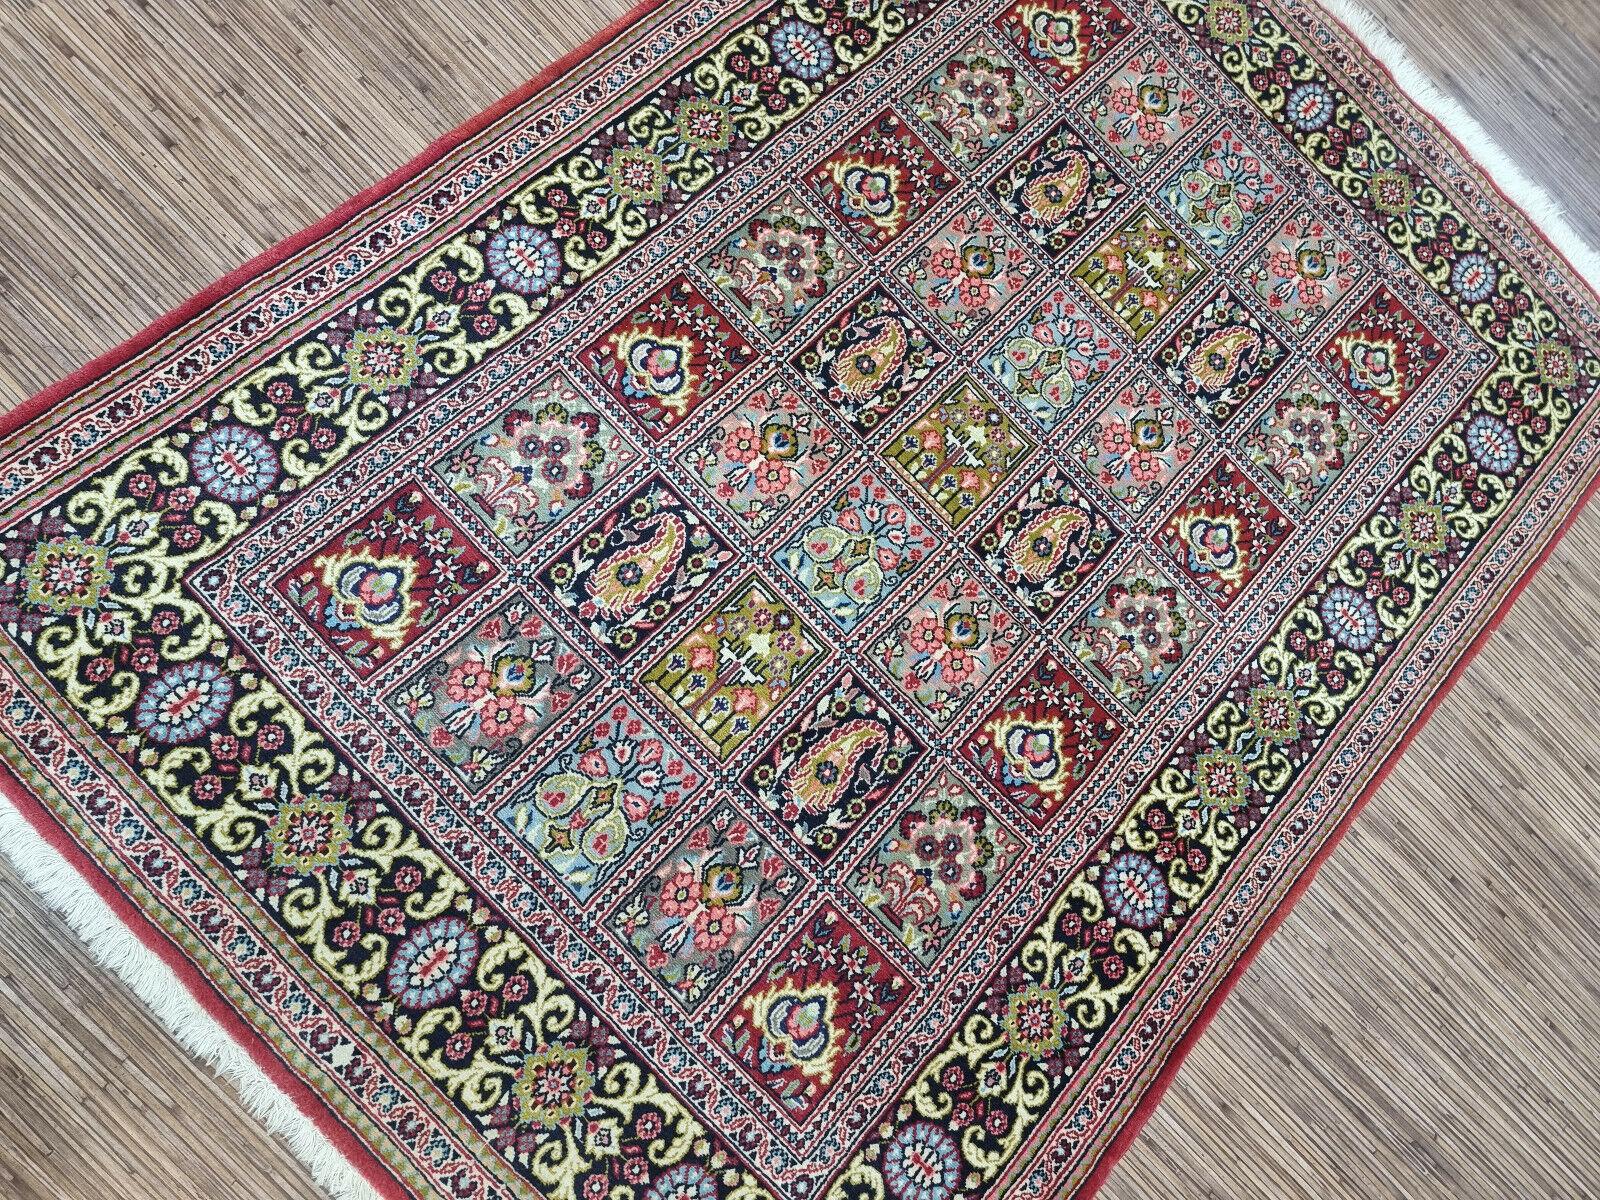 Handmade Vintage Persian Style Qum Rug 3.6' x 5.1', 1970s - 1D87 For Sale 5